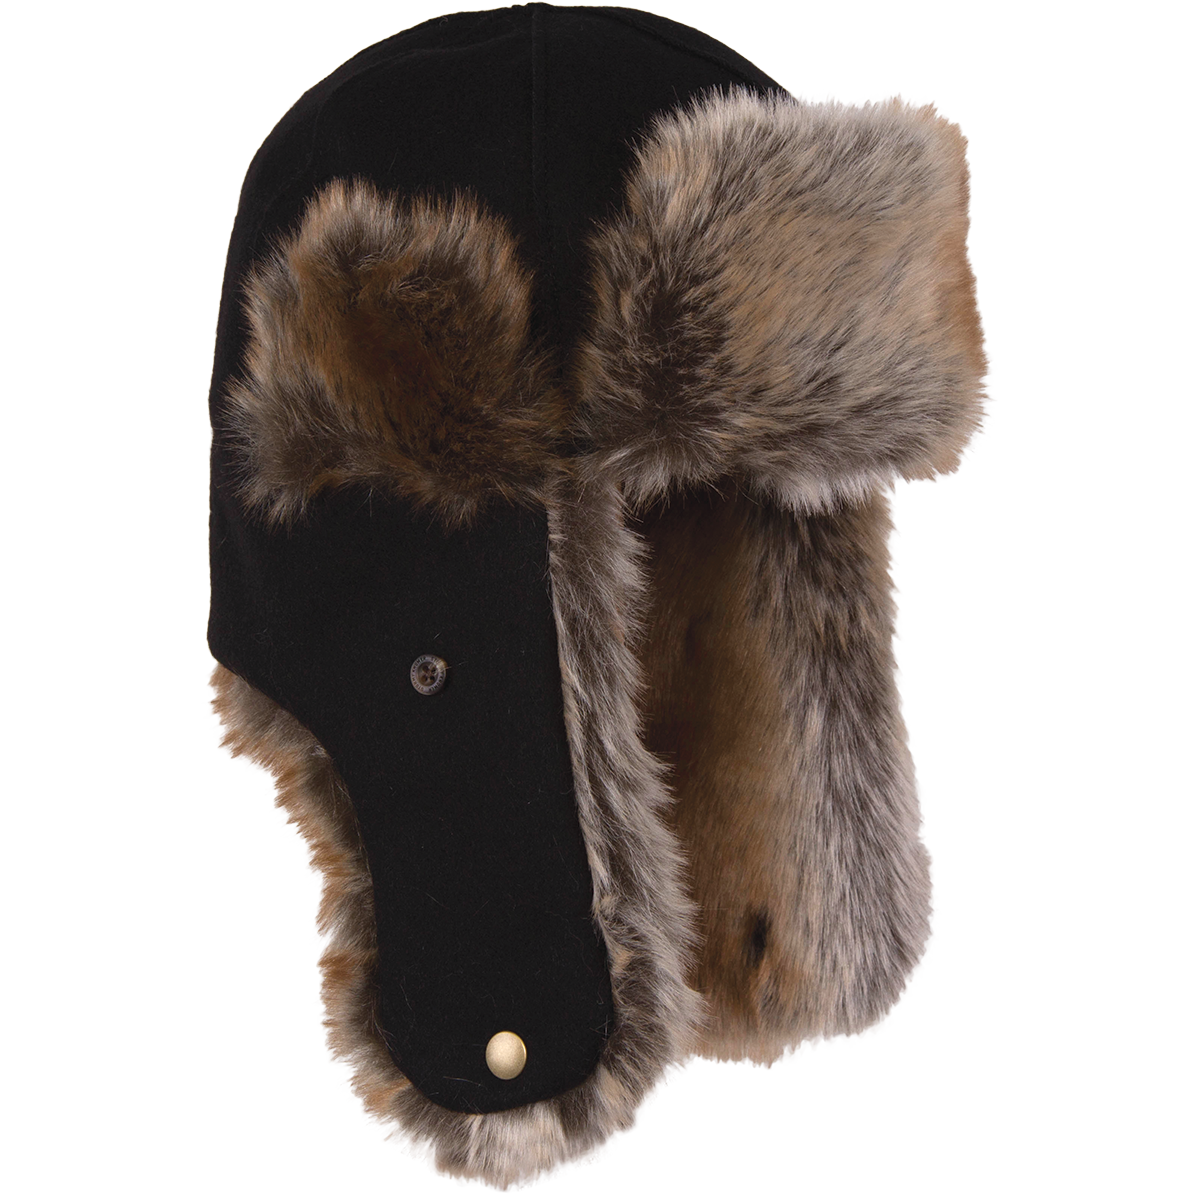 Picture of Stormy Kromer 51210 Northwoods Trapper Hat